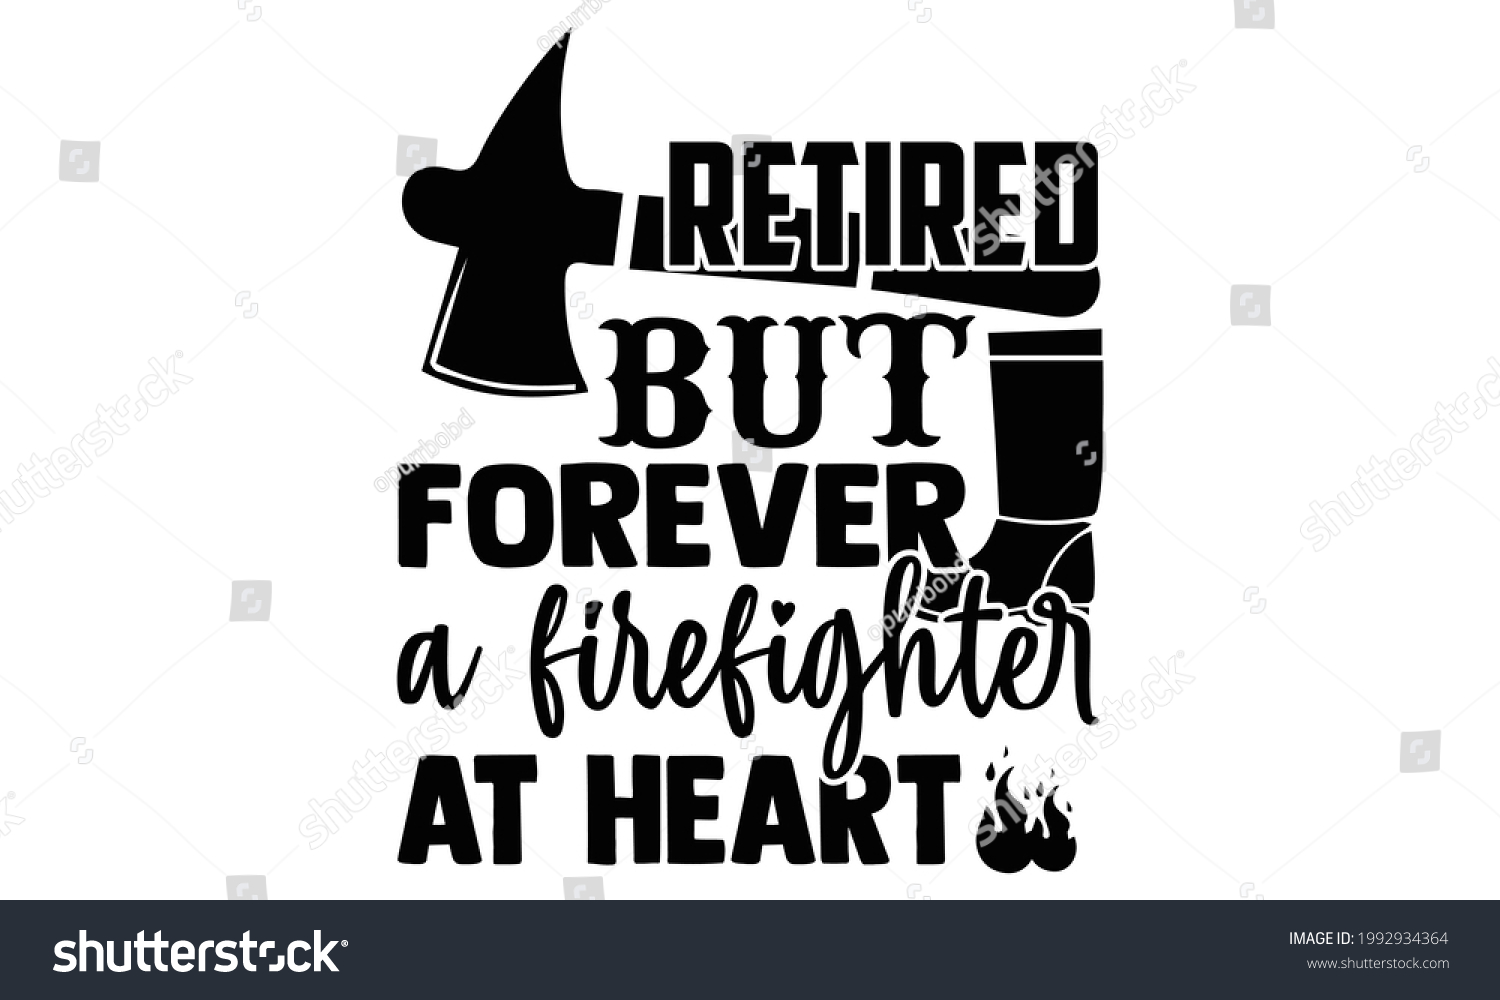 SVG of Retired but forever a firefighter at heart- Firefighter t shirts design, Hand drawn lettering phrase, Calligraphy t shirt design, Isolated on white background, svg Files for Cutting Cricut svg